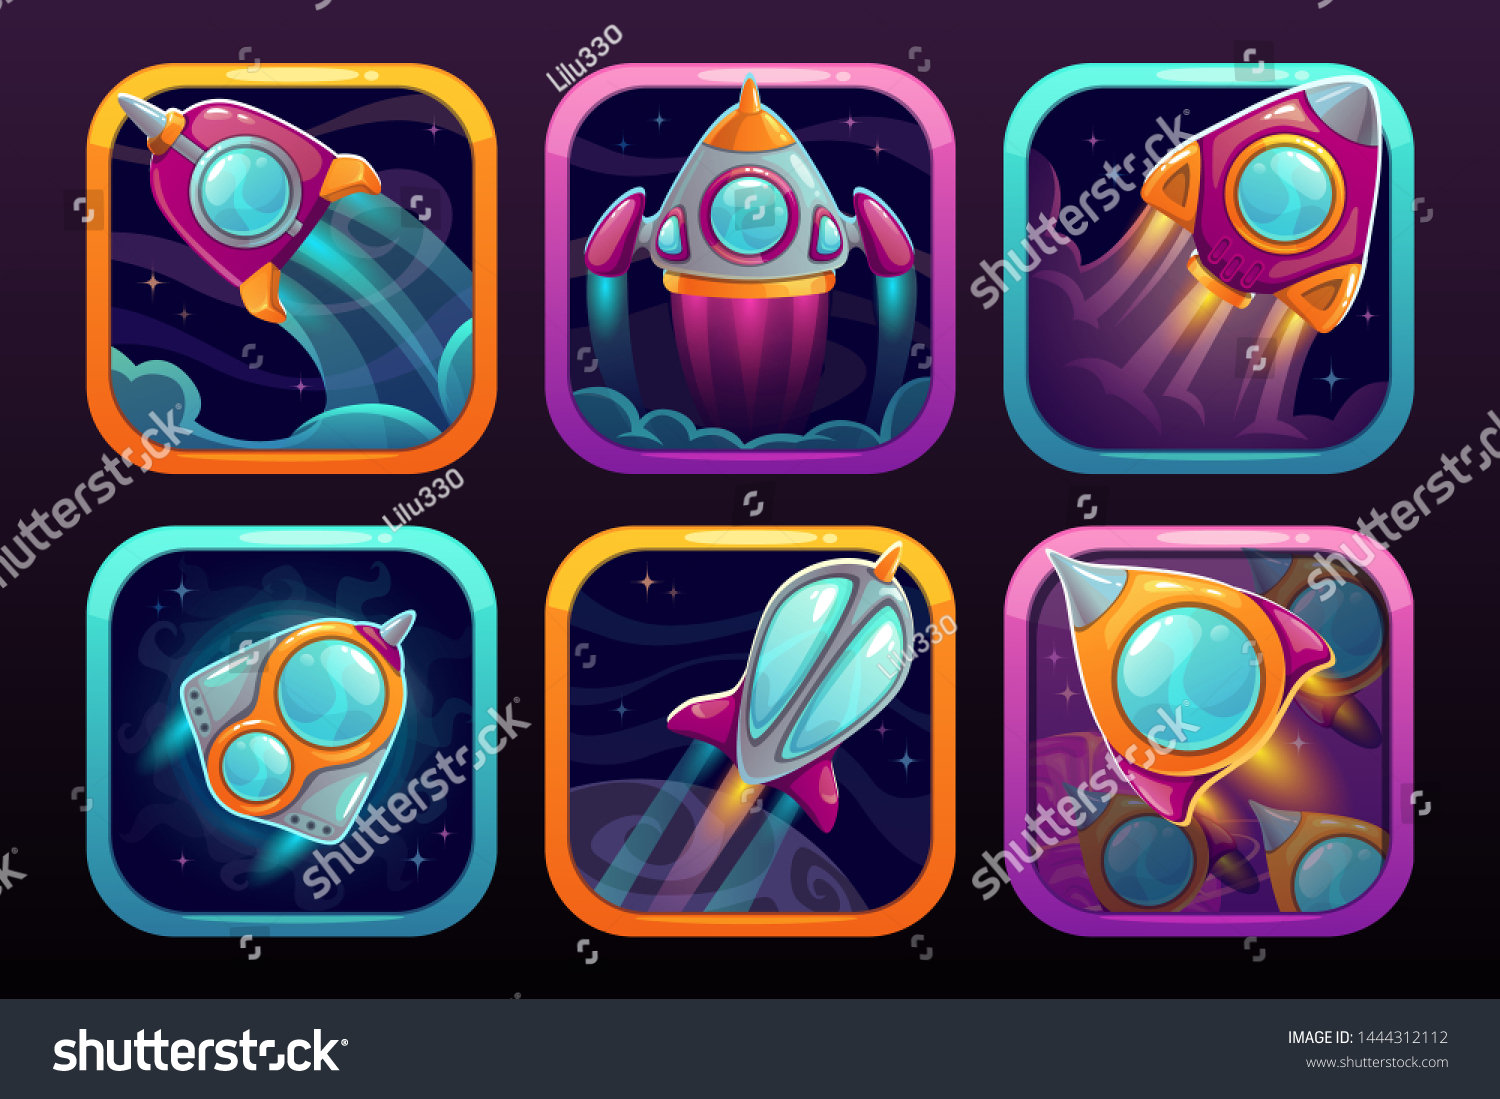 stock-vector-app-icons-with-flying-rockets-space-wars-game-logo-concept-vector-gui-web-elements-set-1444312112